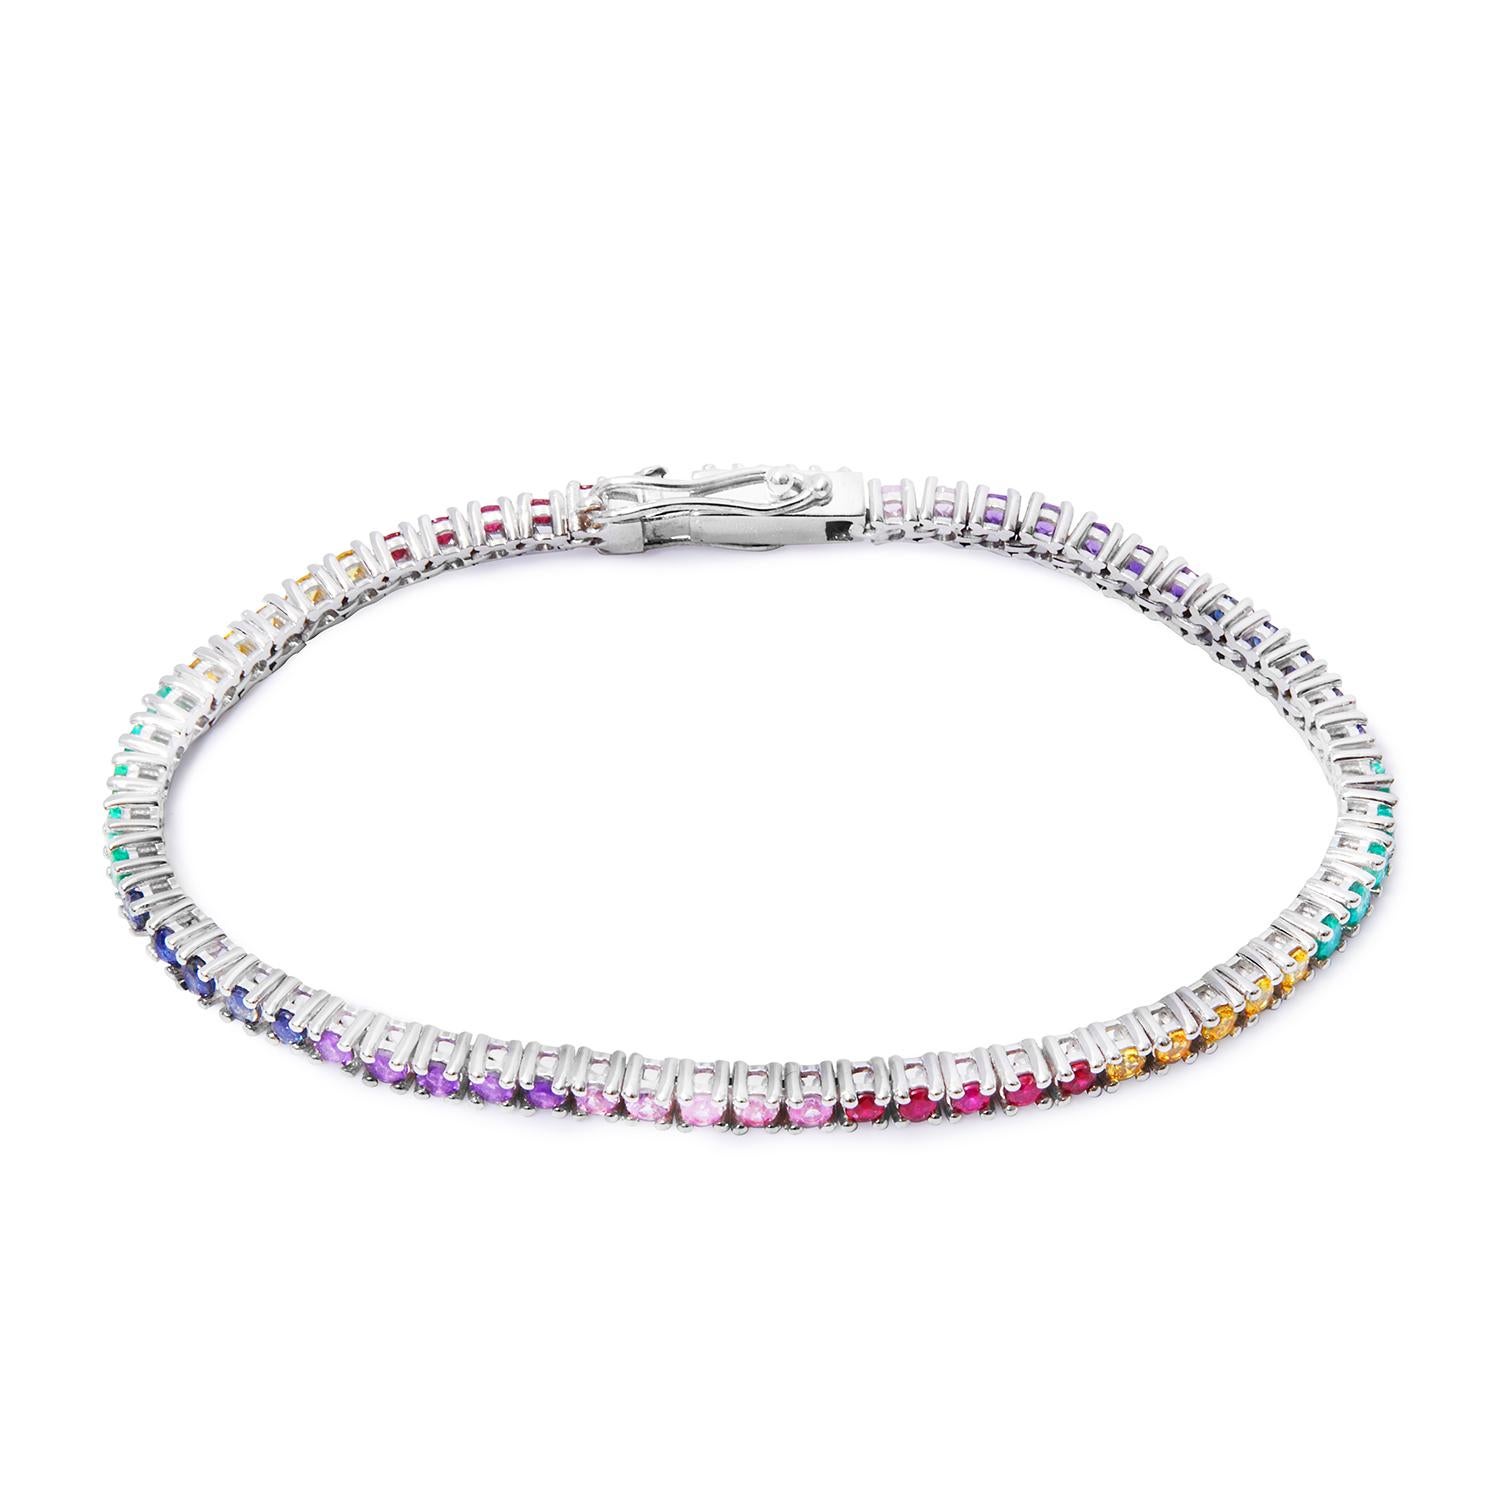 A colourful version of a classical and timeless piece, both precious and playful. Single row tennis bracelet with multicolour natural stones and secure clasp. Minimalistic design made of white gold and precious coloured stones with healing